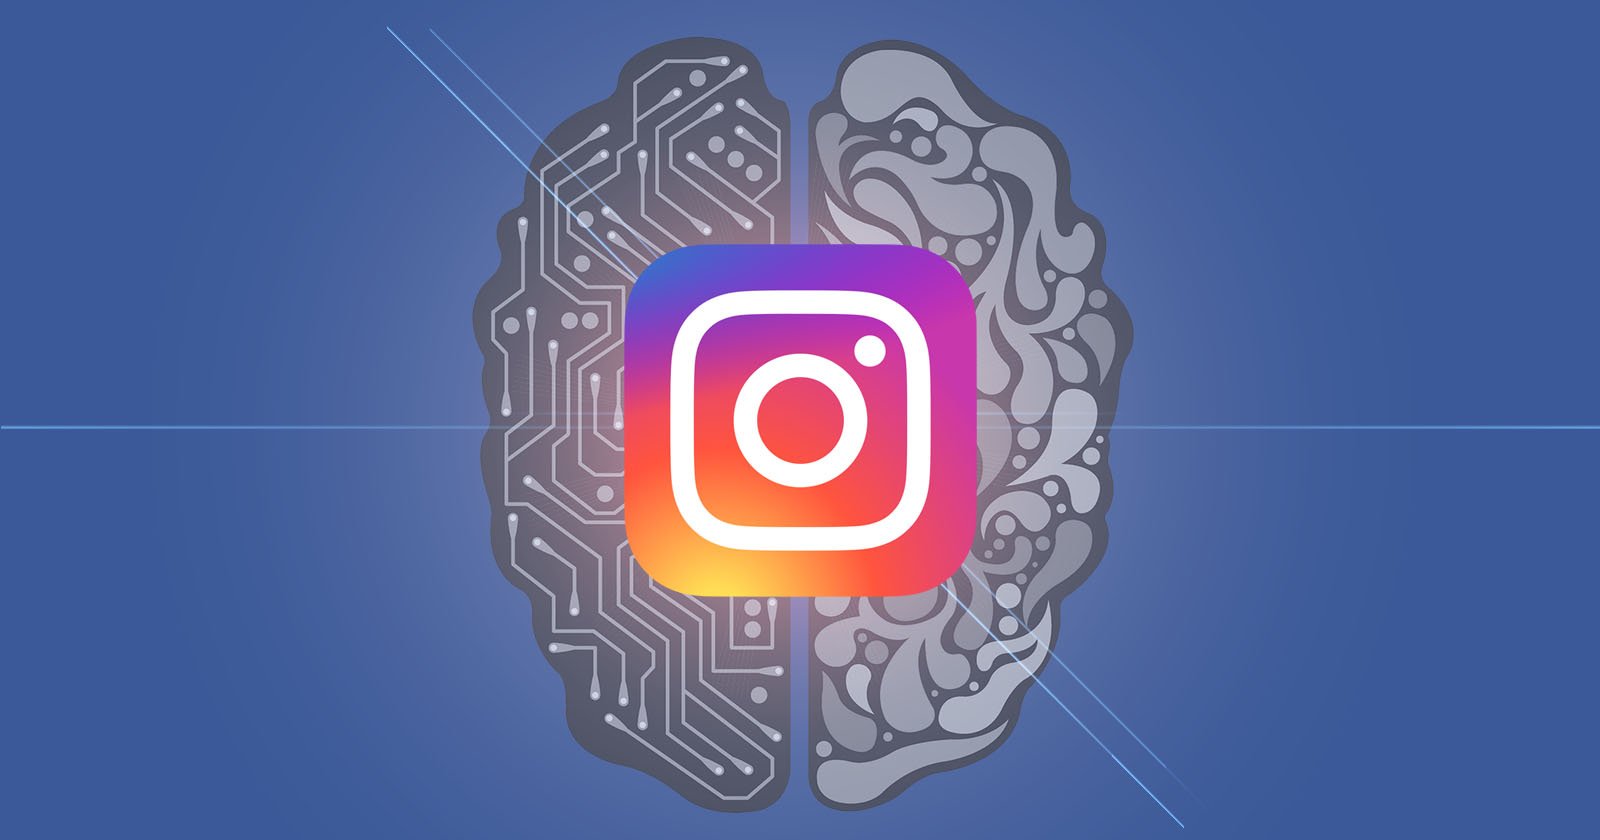 Facebook Training Image Recognition AI with Billions of Instagram Photos1600 x 840